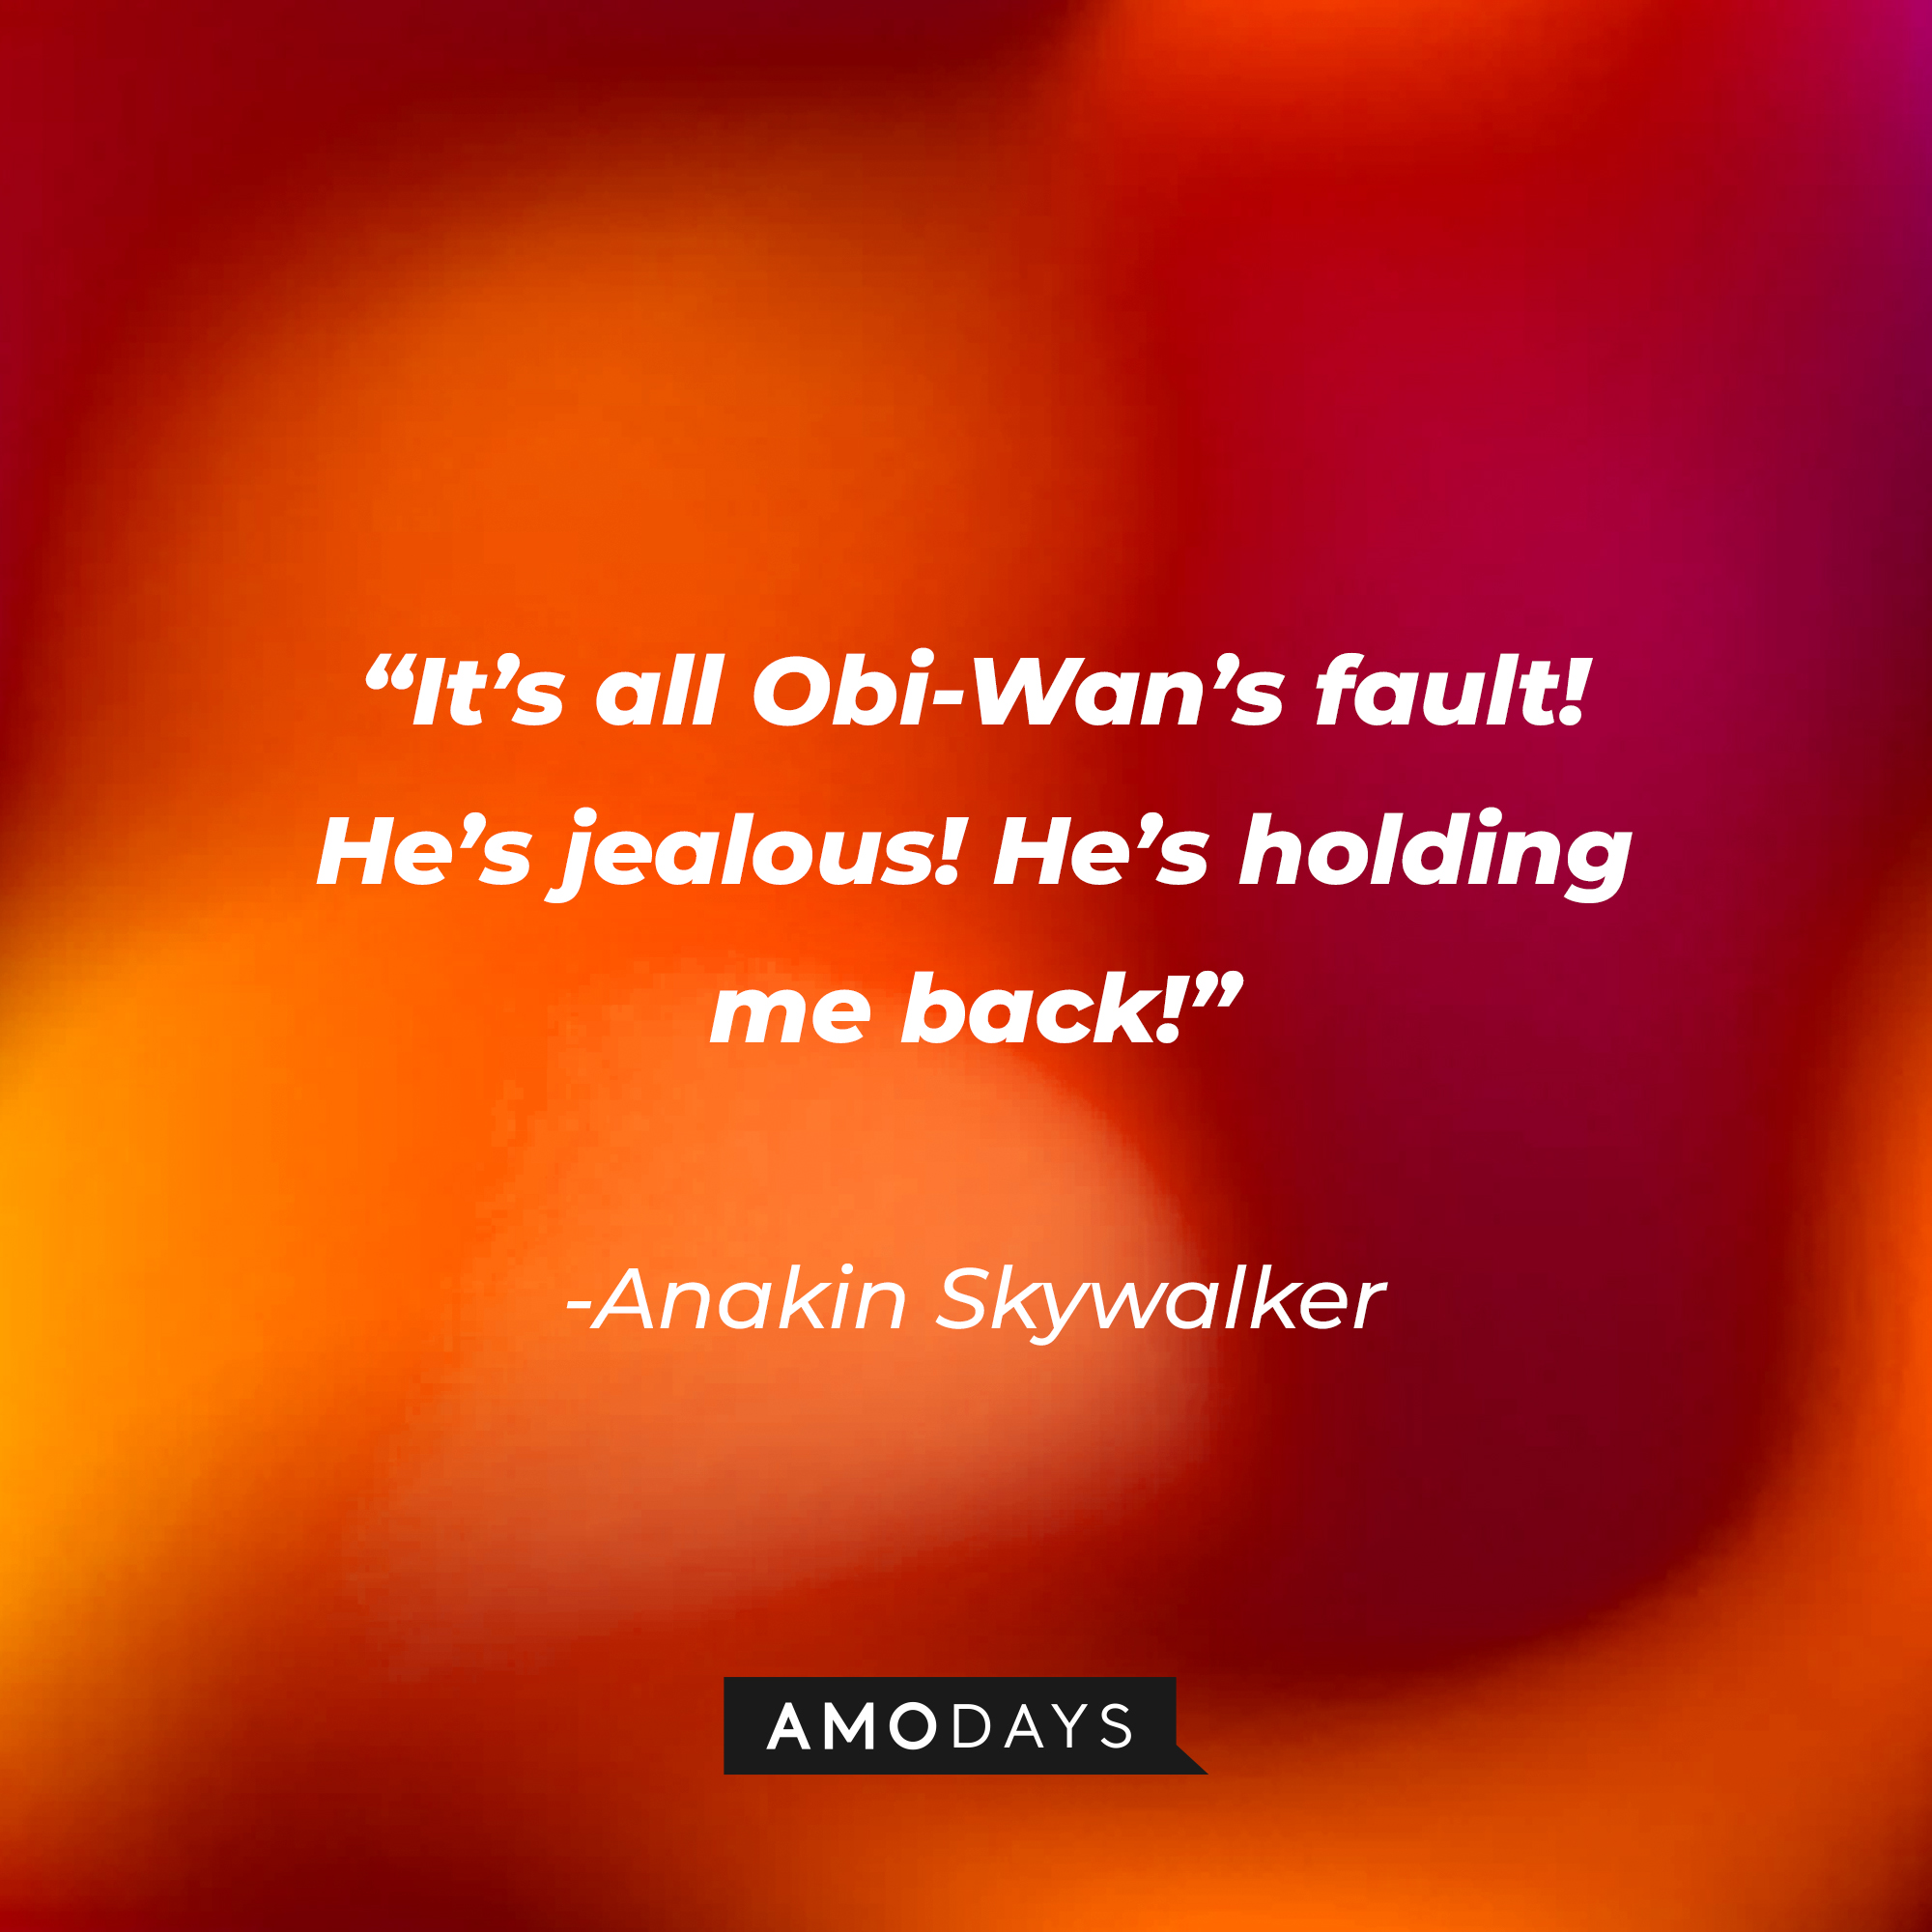 Anakin Skywalker’s quote: “It’s all Obi-Wan’s fault! He’s jealous! He’s holding me back!” | Source: AmoDays